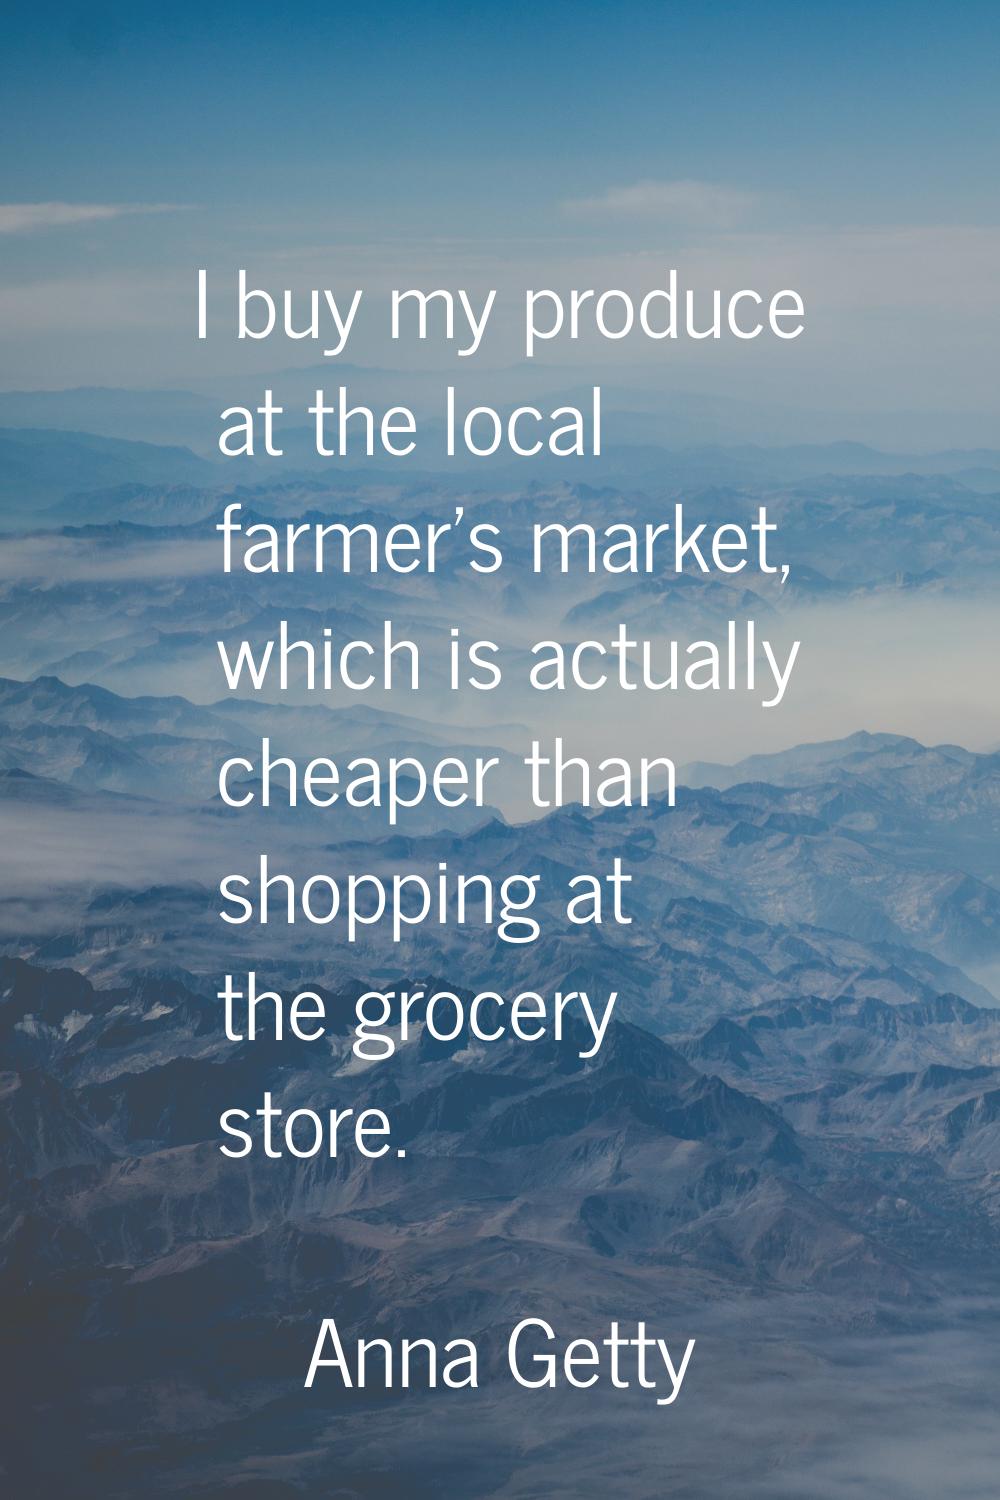 I buy my produce at the local farmer's market, which is actually cheaper than shopping at the groce